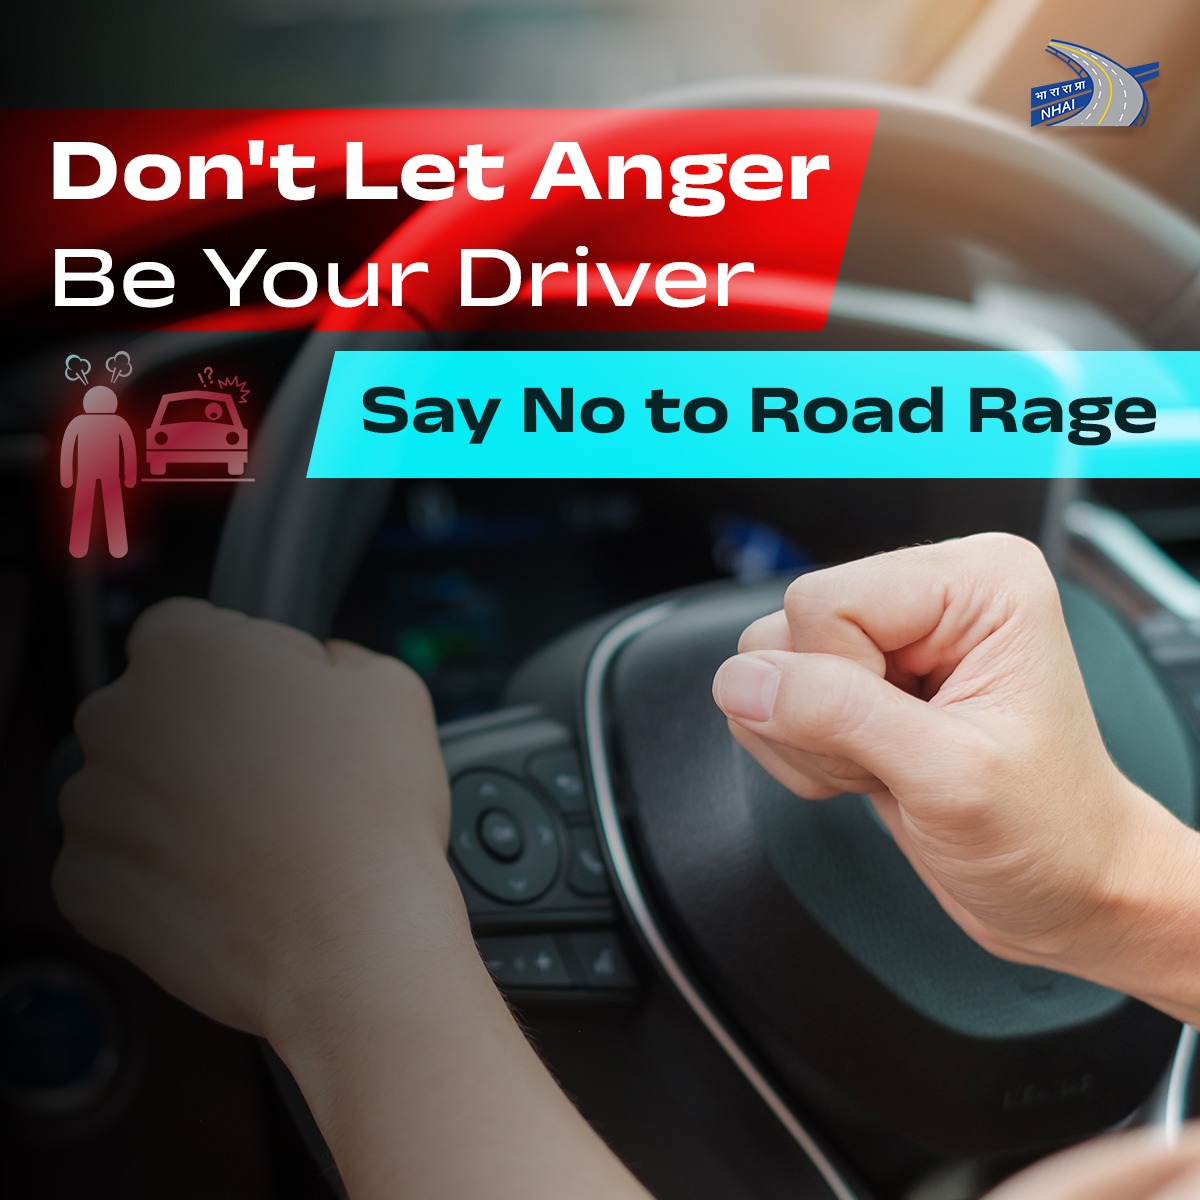 #RoadRage can turn a smooth ride into a hazardous journey. In traffic, especially during rush hour, don't let anger take over your safety and that of others on the road. 
#SadakSurakshaJeevanRaksha #RoadSafetyTips #NHAI